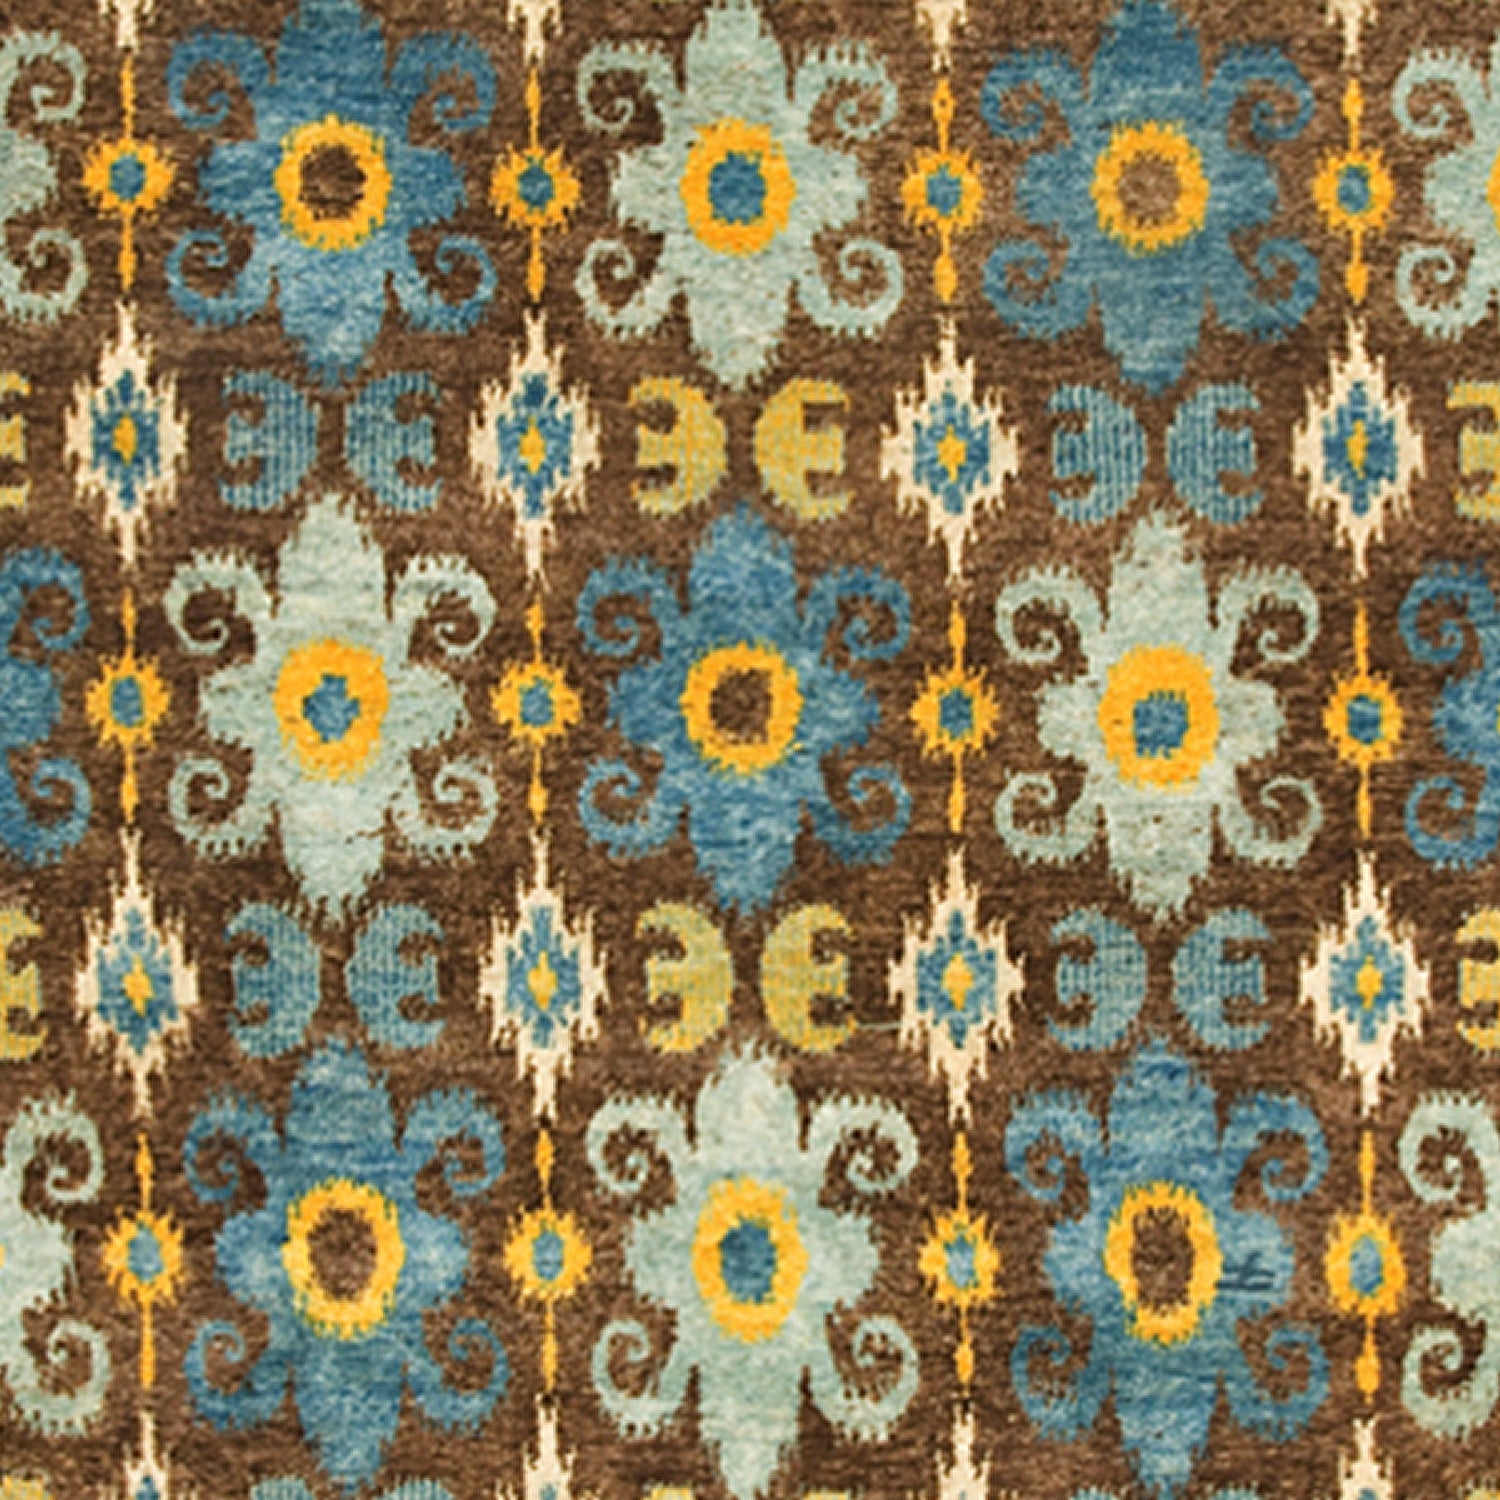 Woven rug swatch in a repeating ikat floral pattern in shades of blue and yellow on a brown field.